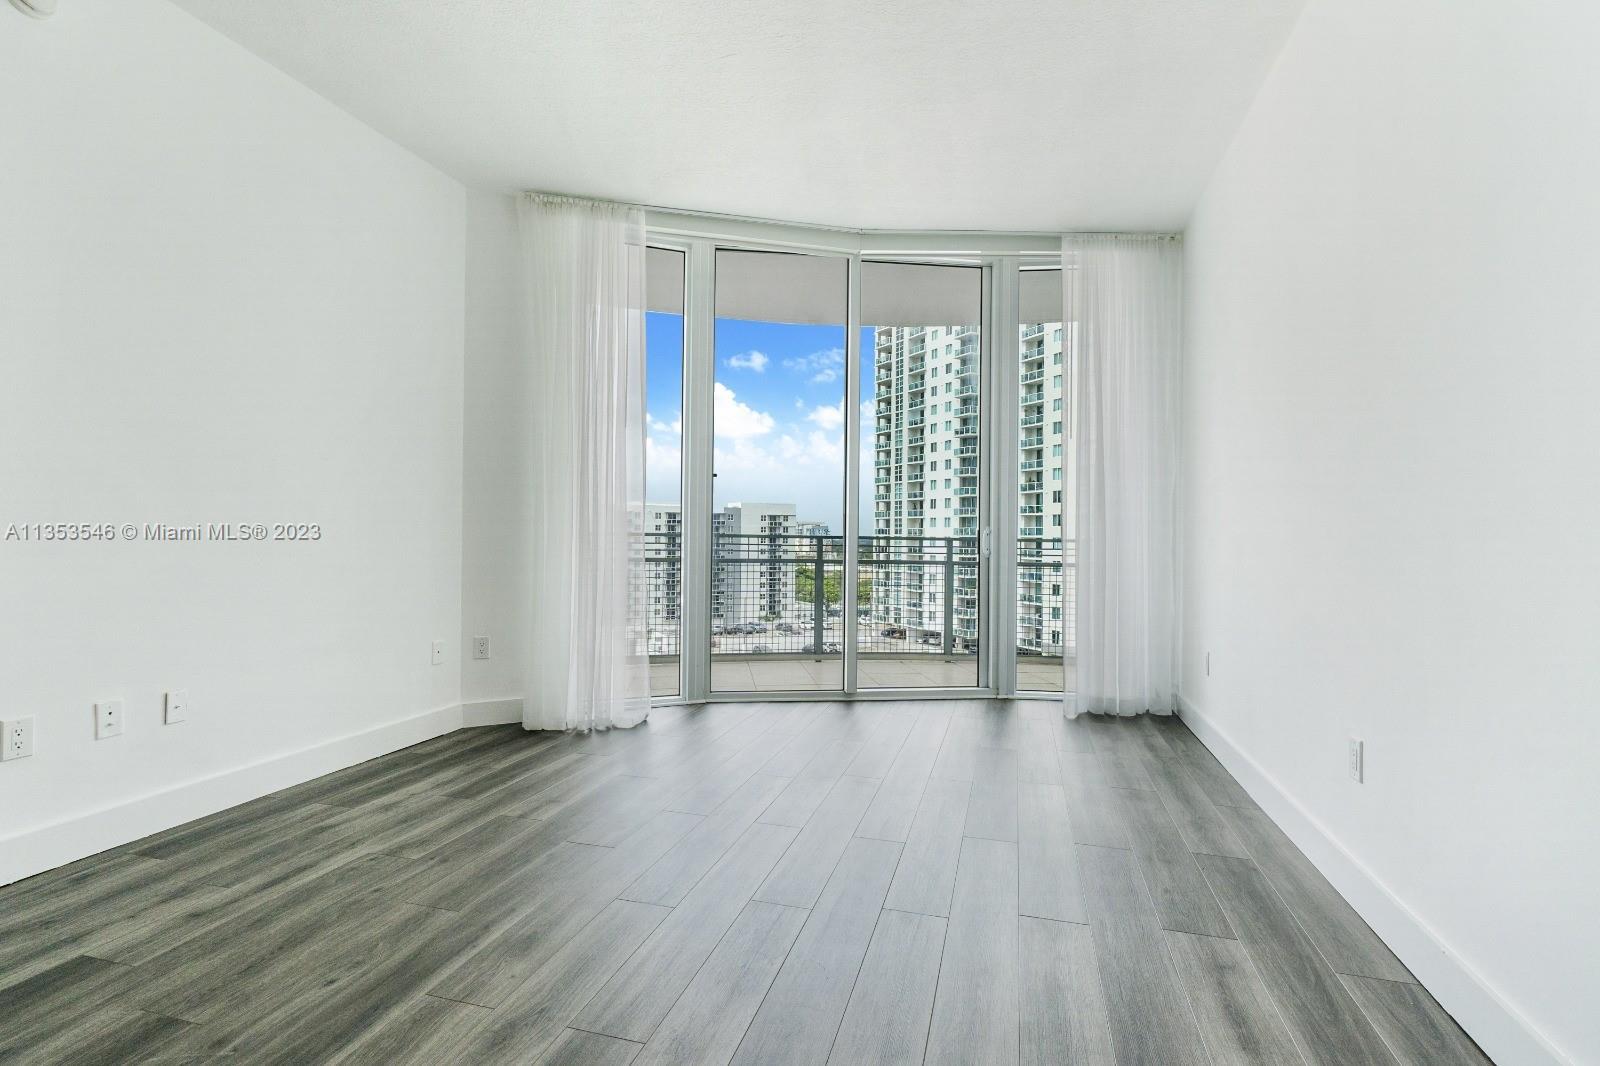 Welcome to 350 NE 24th St # 1008, a stunning two-bedroom, two-bathroom modern boutique condo in Miam